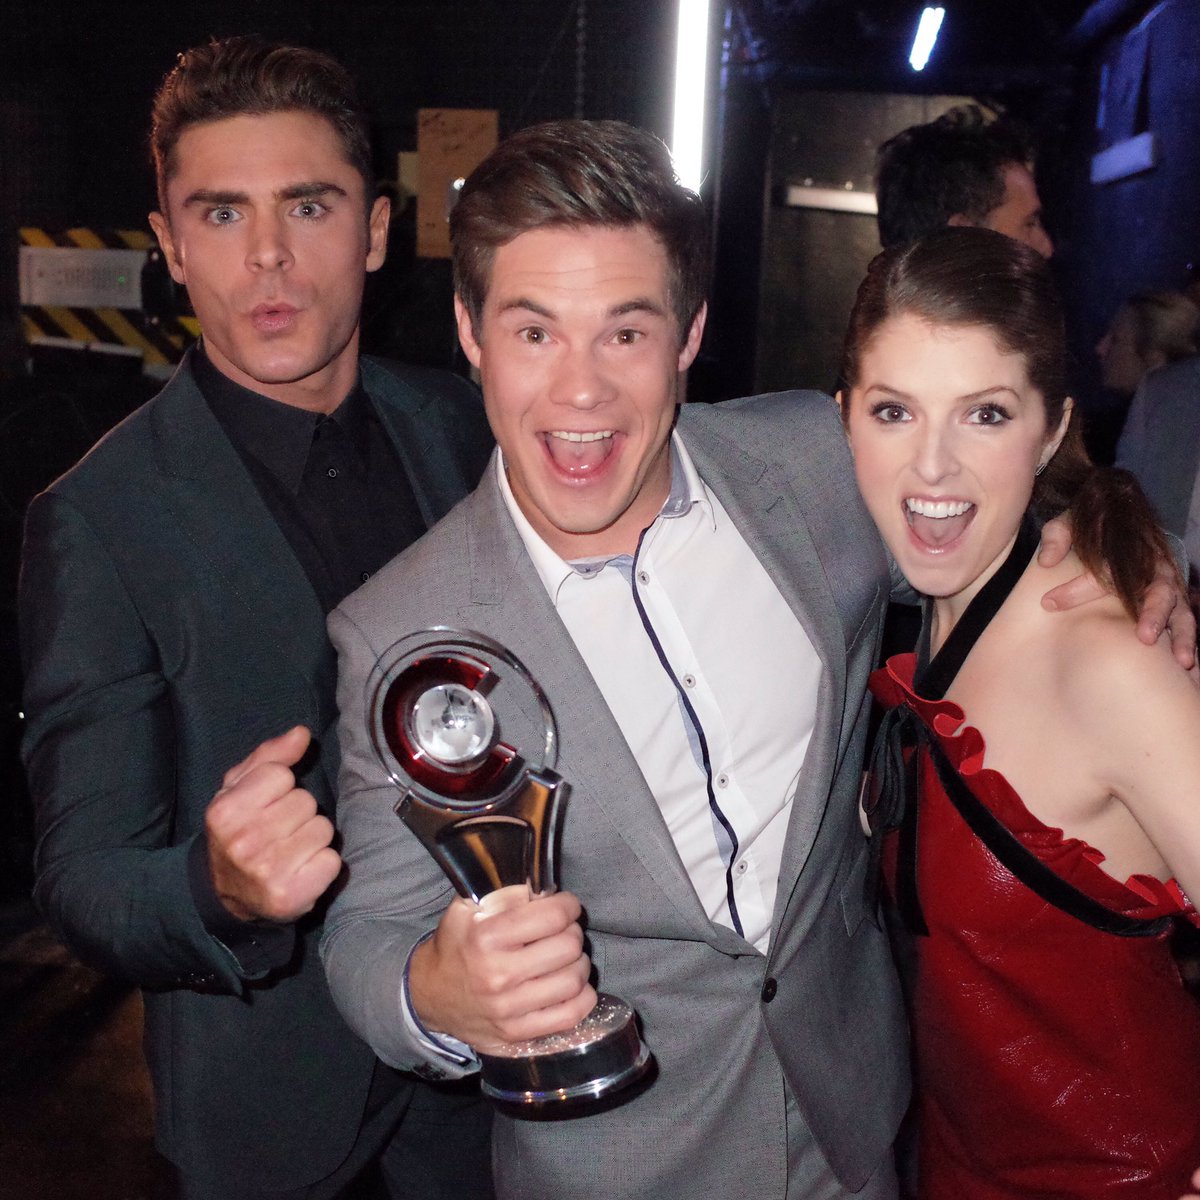 We done did it! Congrats to Anna & Adam for winning best comedy trio at @CinemaCon. #mikeanddaveneedweddingdates https://t.co/kM7mb7Lnui